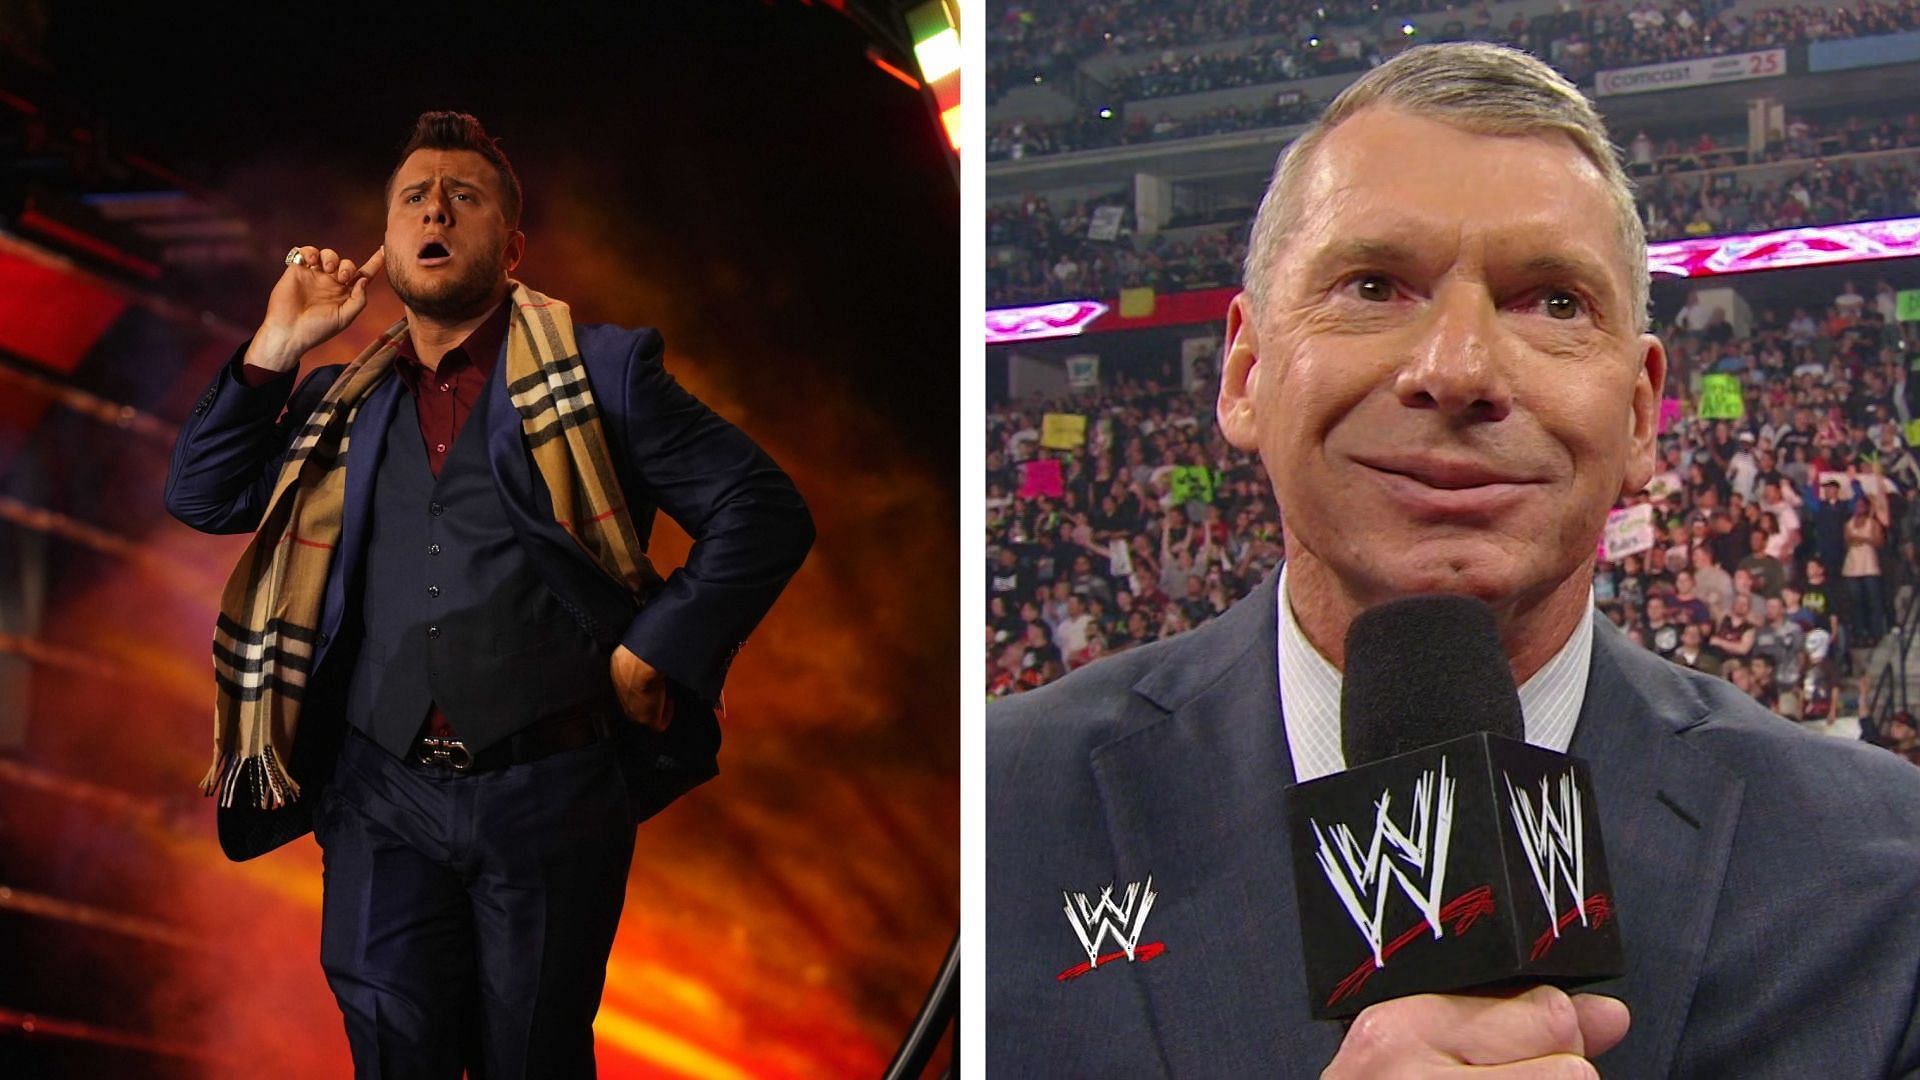 MJF has mentioned WWE and Vince McMahon multiple times in the past.